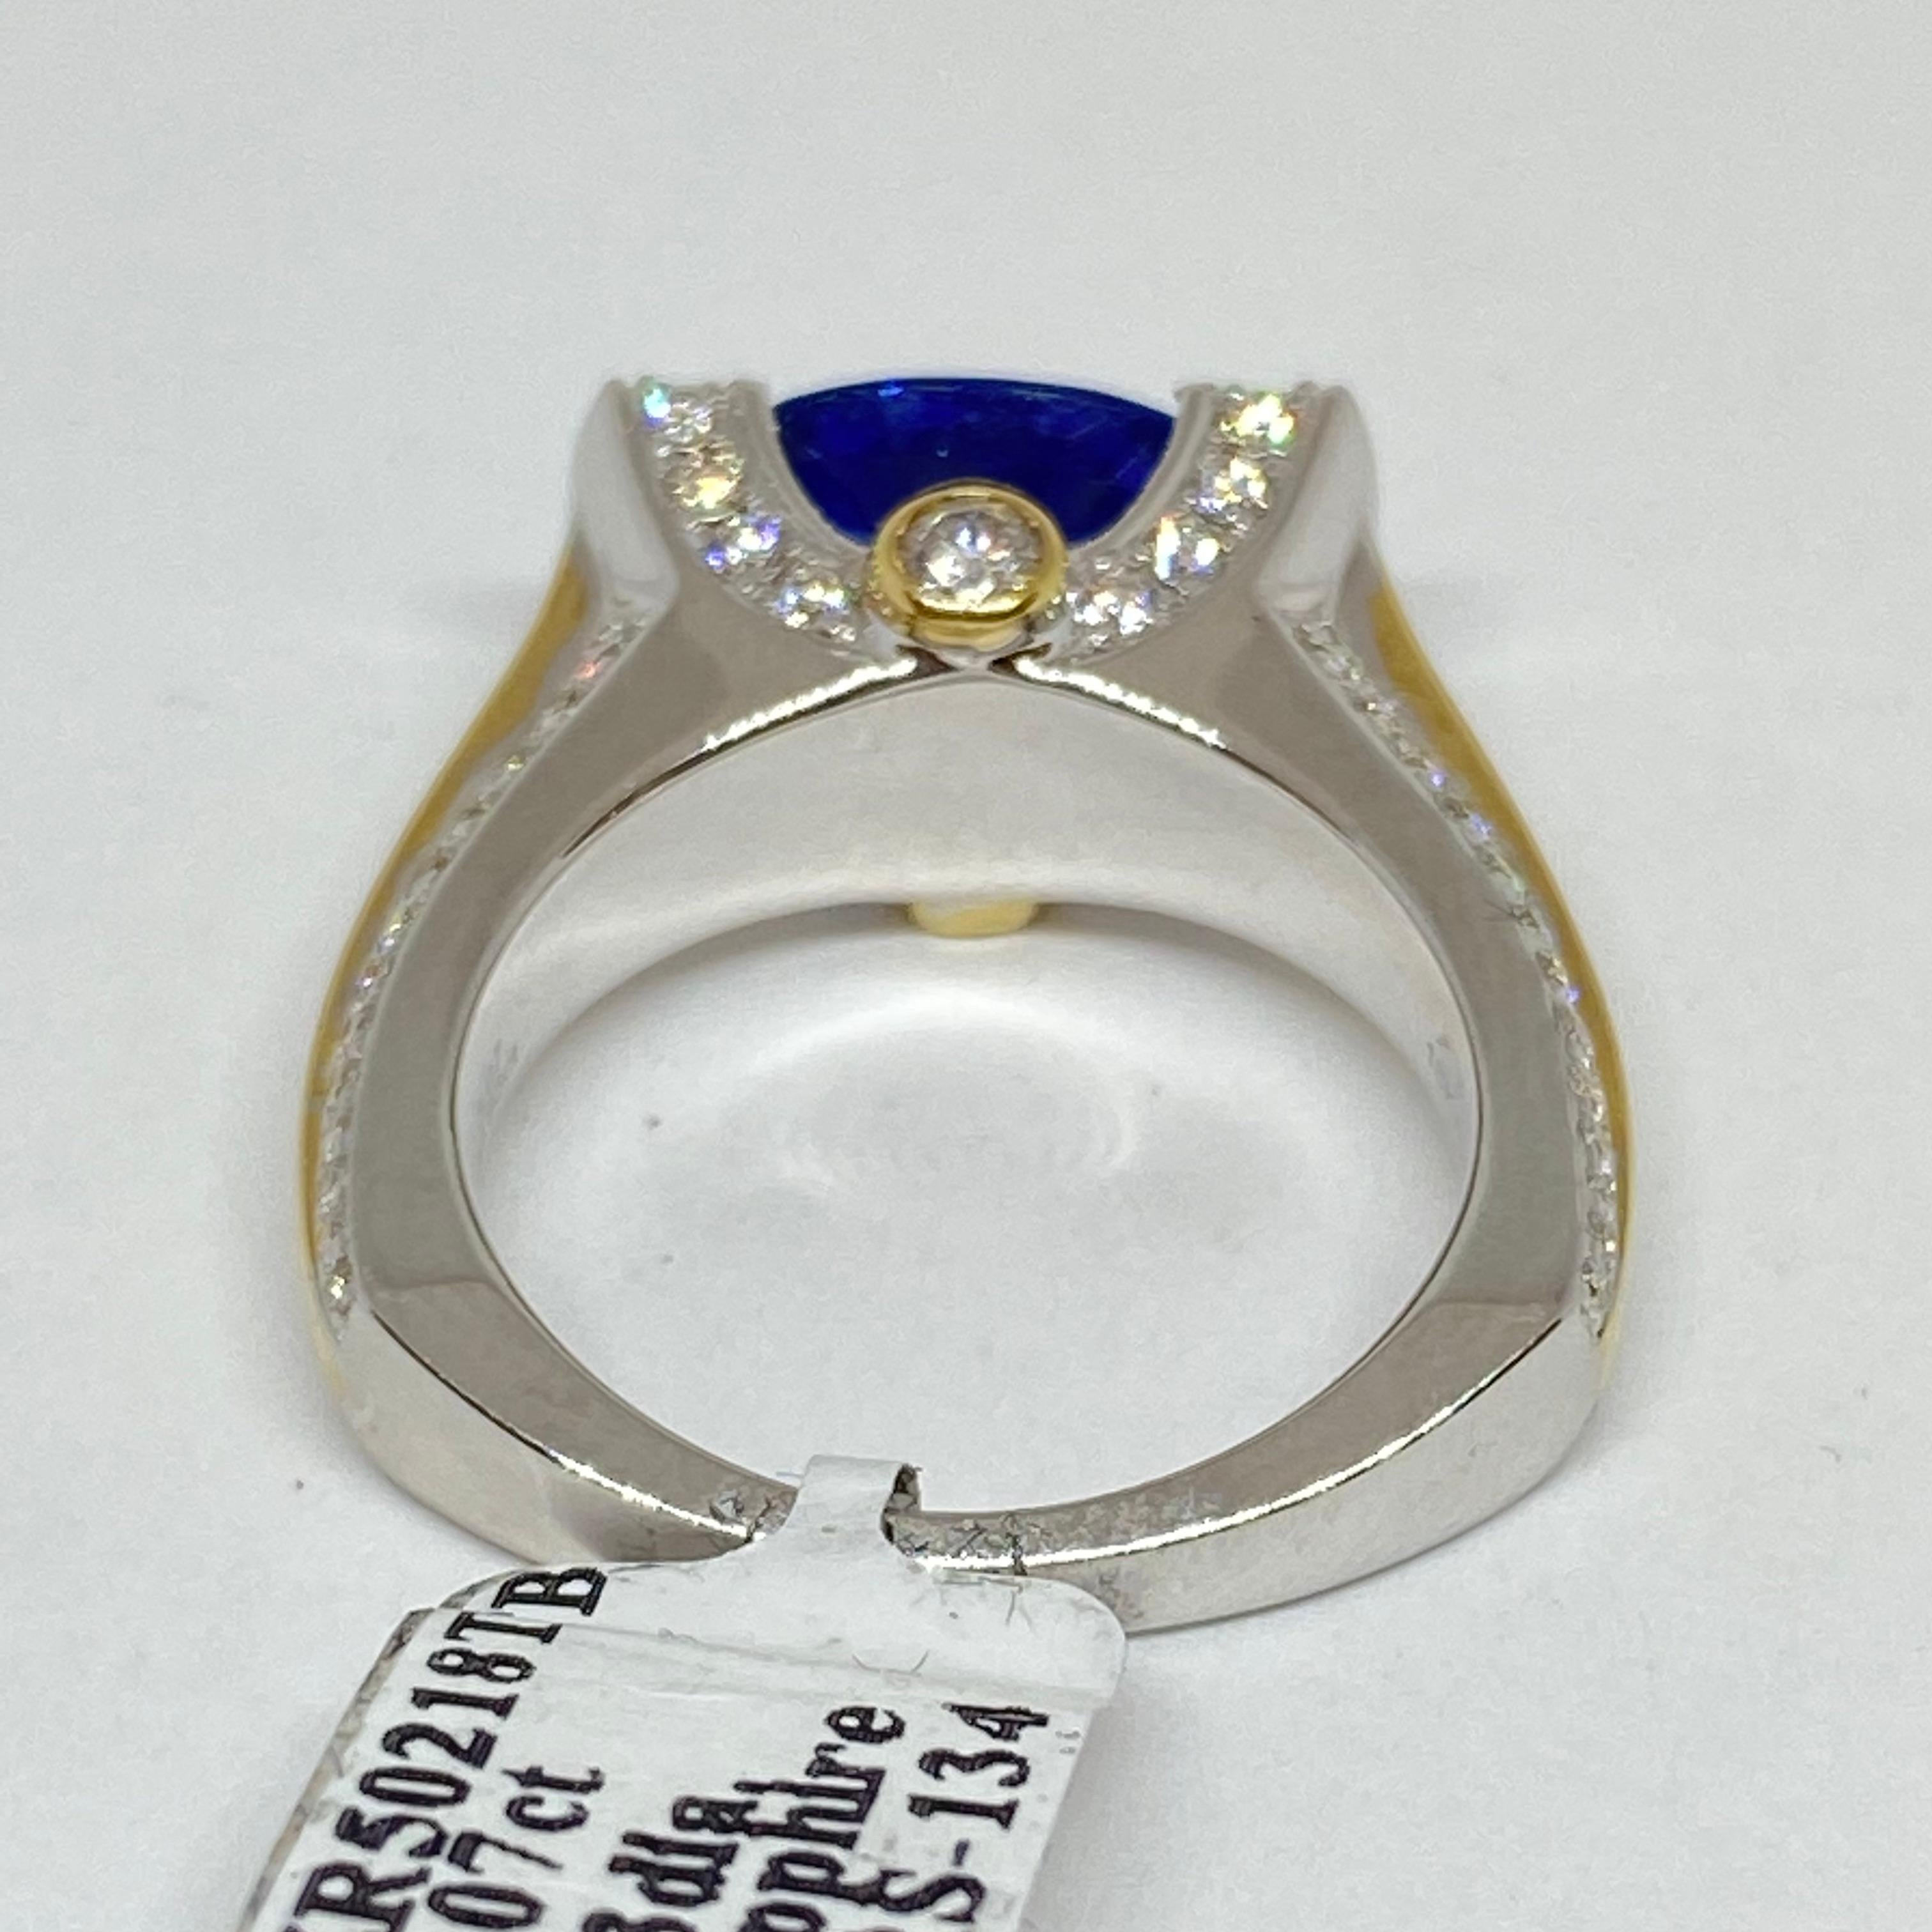 Unique 18 karat two tone mounting set with a natural vibrant blue Sapphire. The sapphire is set east-west in a pave diamond channel tension style mounting, pave diamonds tapering to a square European shank. Bezel and pave set diamonds on the